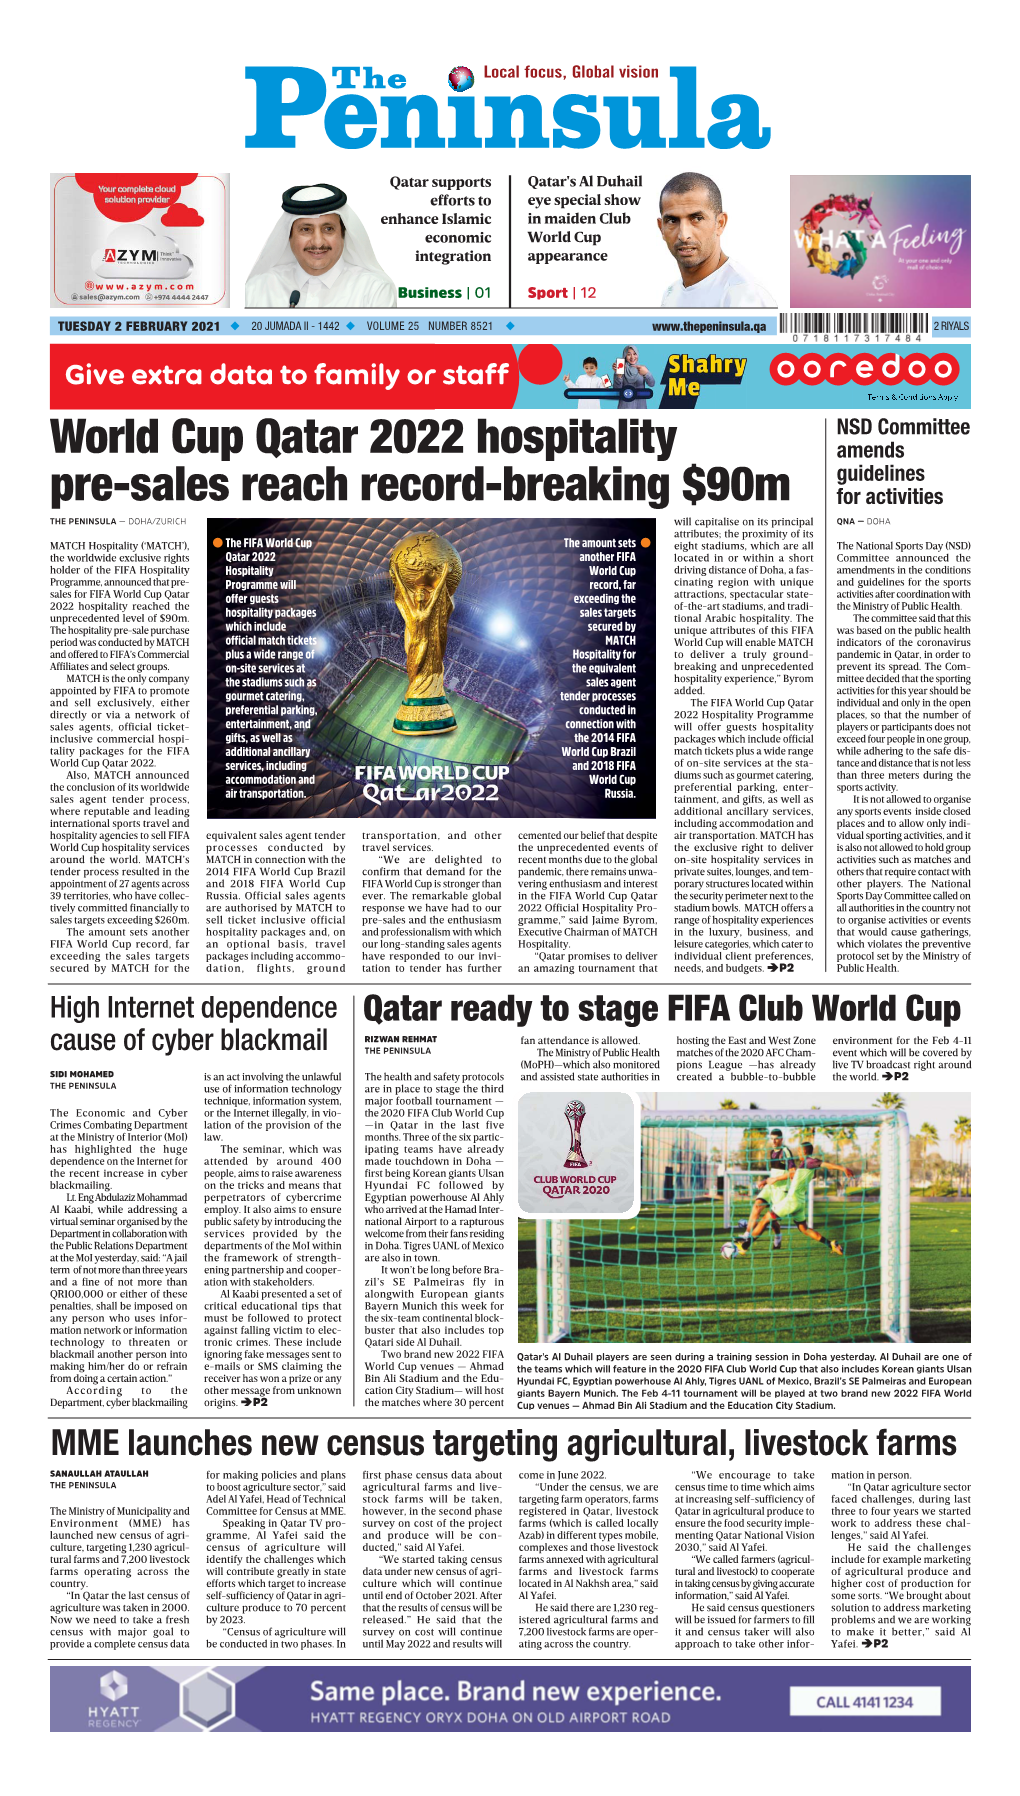 World Cup Qatar 2022 Hospitality Pre-Sales Reach Record-Breaking